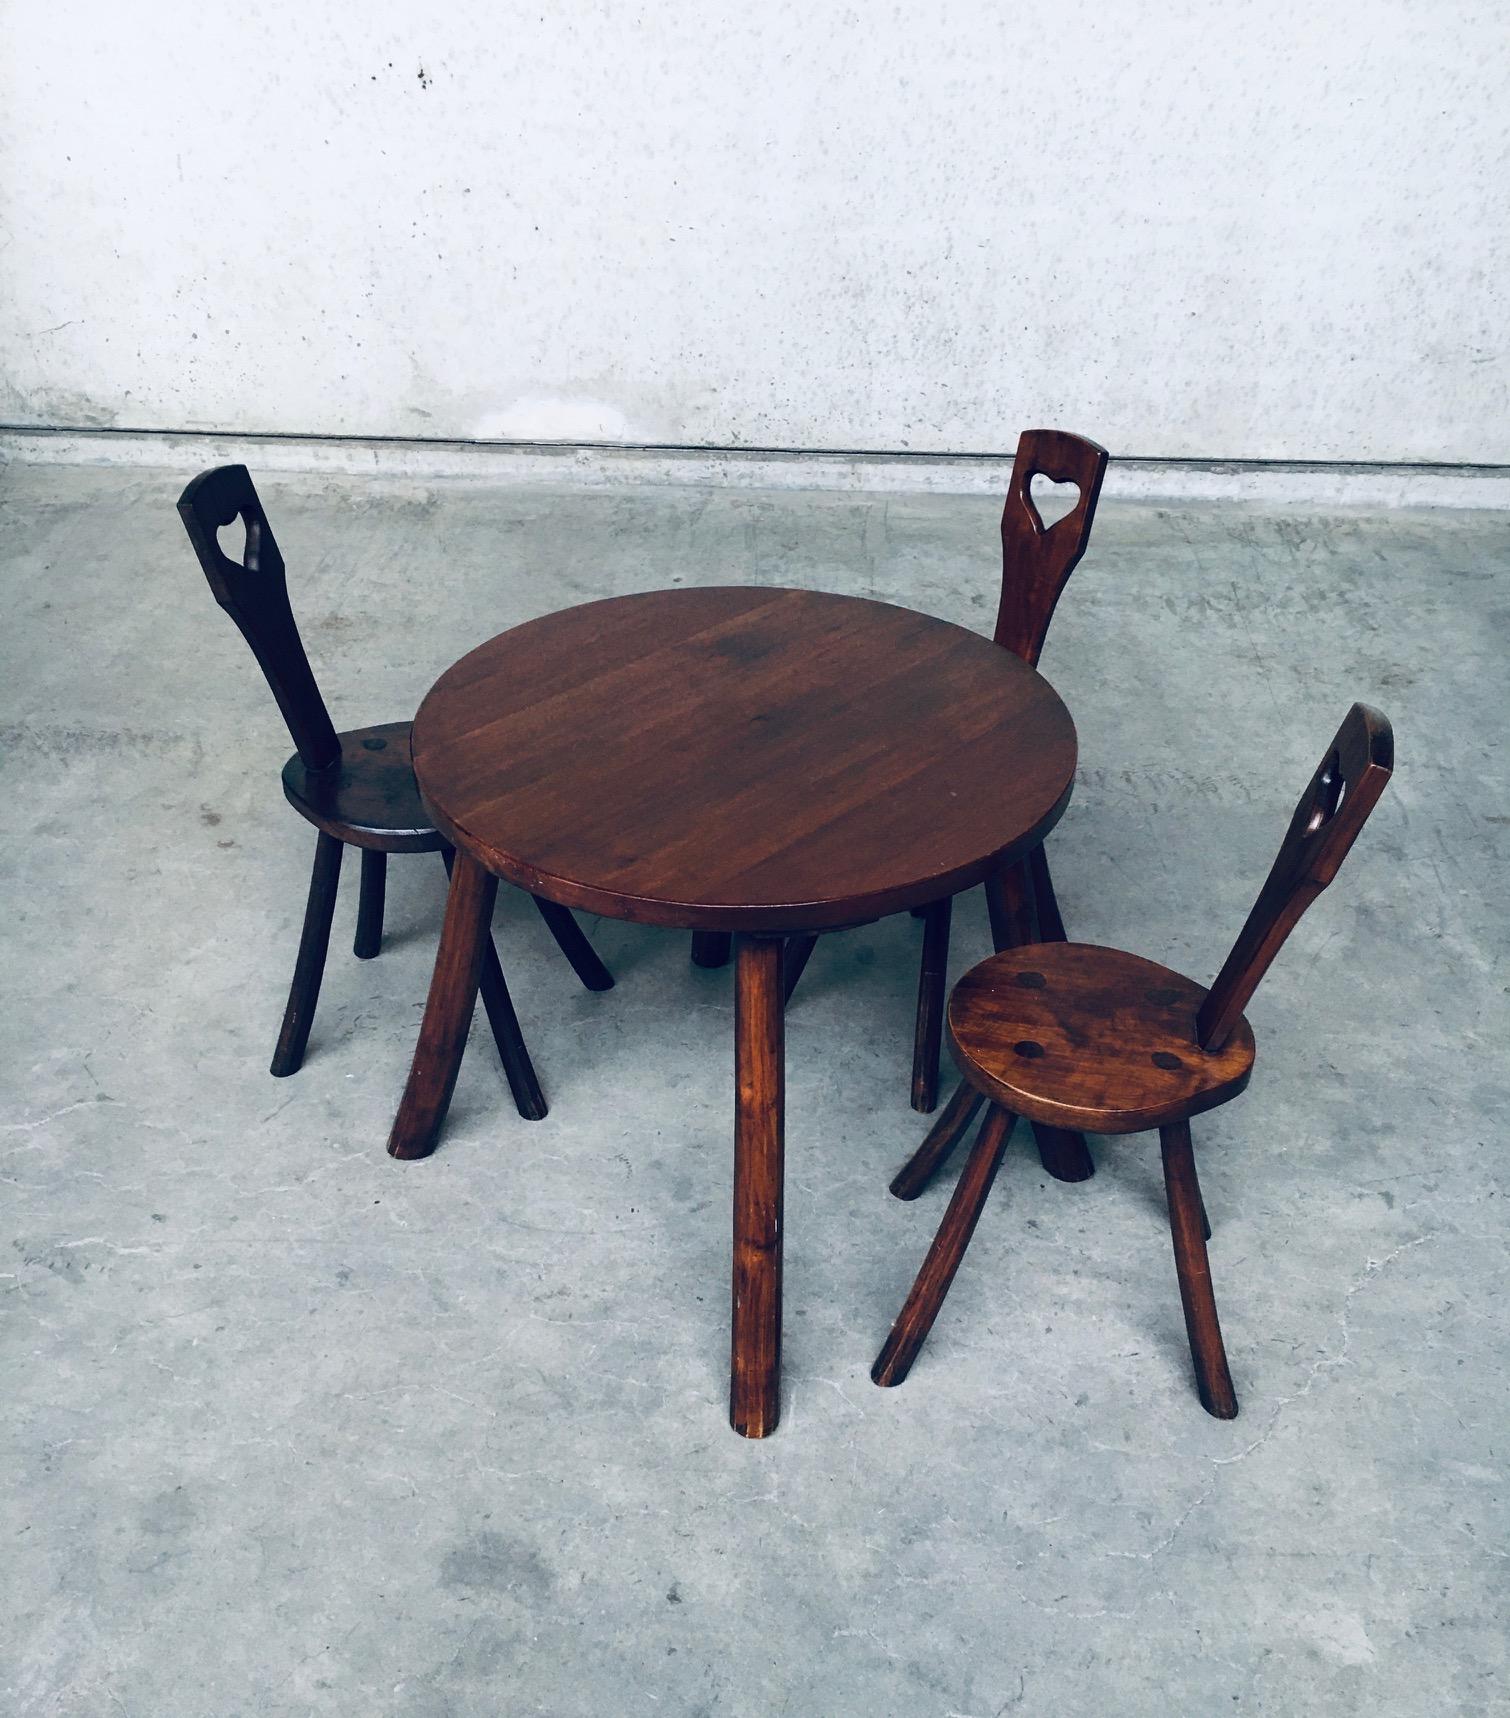 Vintage Wabi Sabi Style Rustic French Design Handcrafted Solid Oak Round Dining Table with 3 matching dining chairs. Made in France in the 1940's. Solid oak handmade round table on 4 carved legs with 3 matching chairs. The chairs have a rounded seat